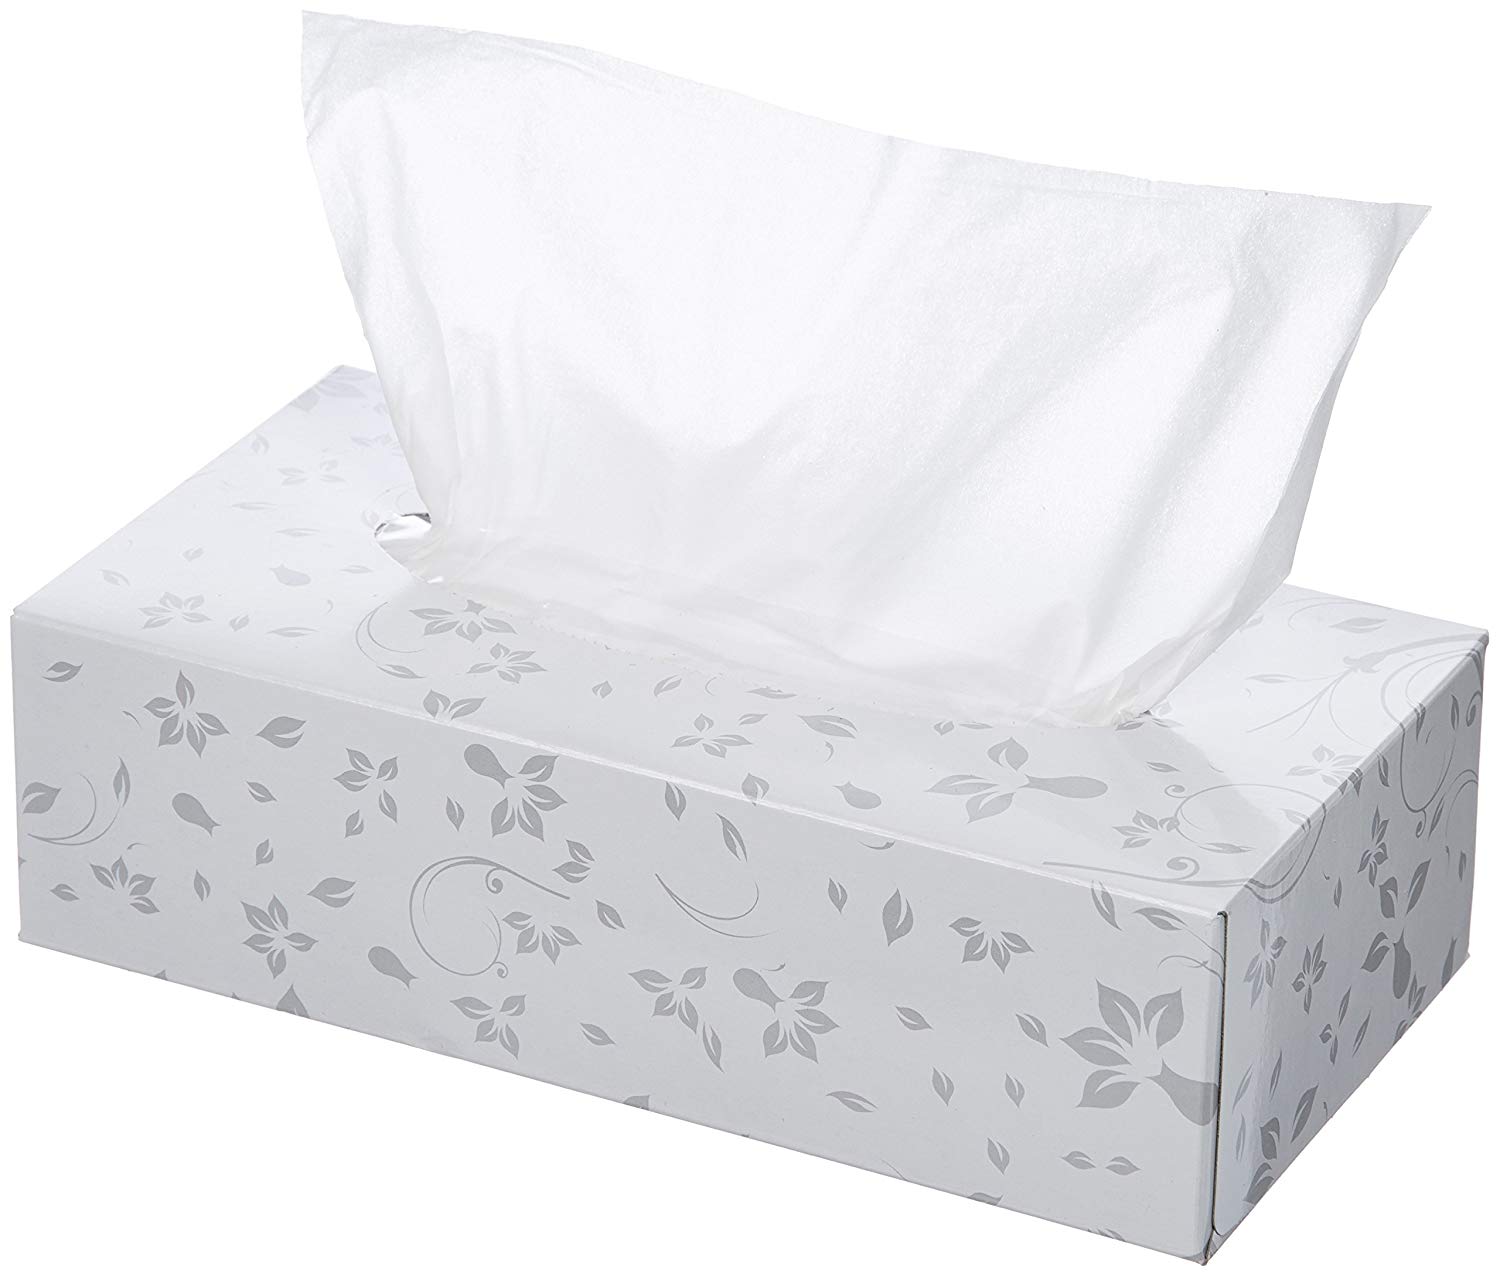 AmazonBasics Professional Facial Tissue Flat Box for Businesses, 2-Ply,  White, 125 Tissues per Box, 48 Boxes: Traveller Location: Industrial & Scientific